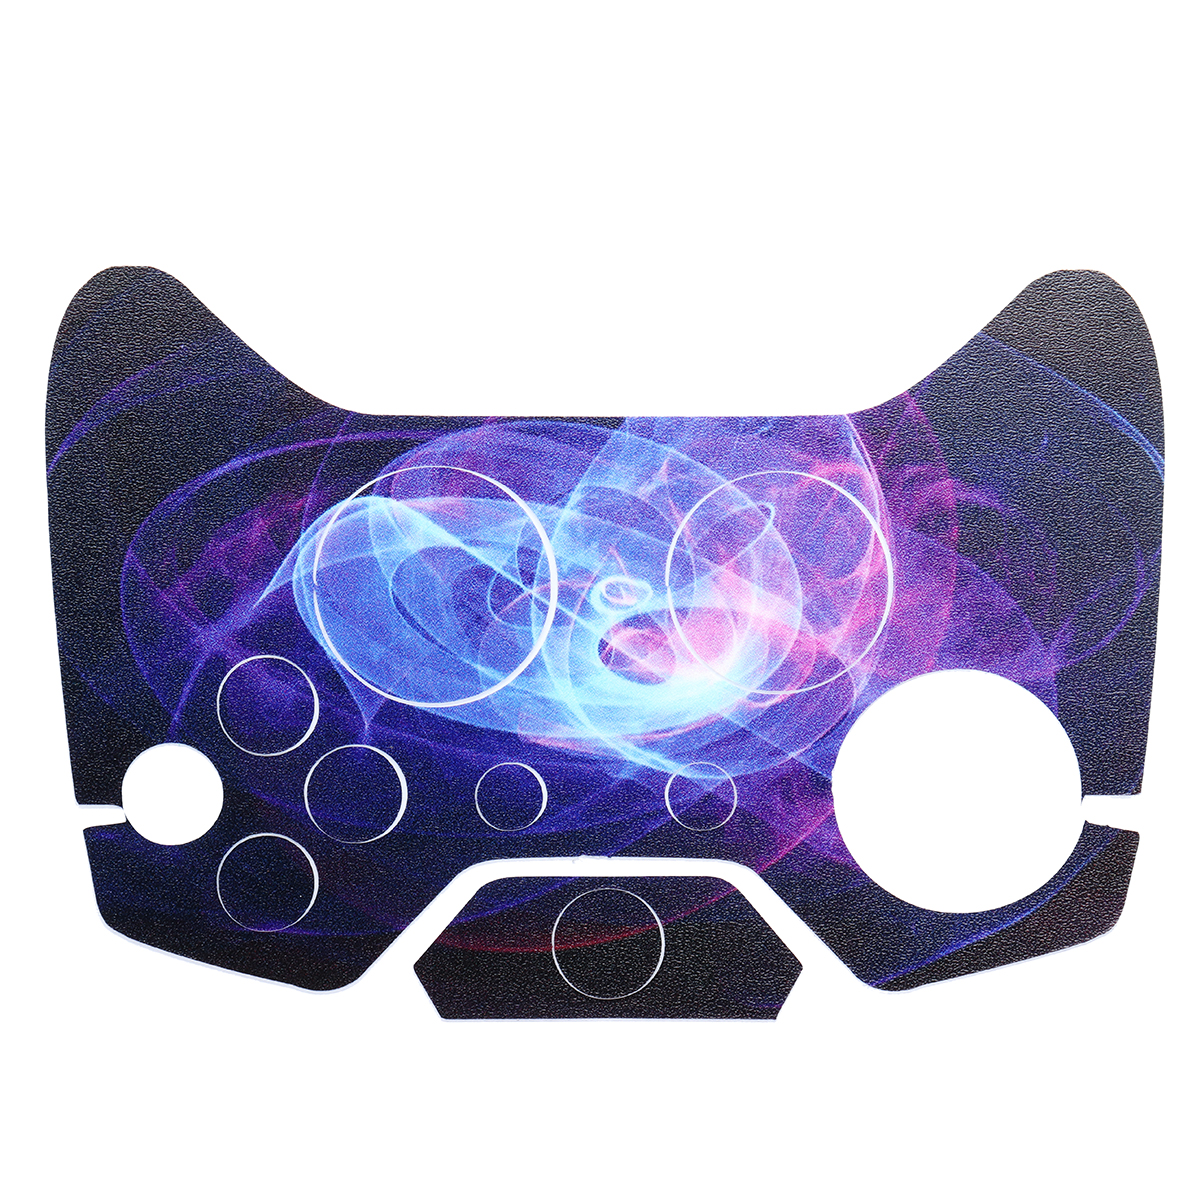 Purple Protective Vinyl Decal Skin Stickers Wrap Cover For Xbox One Game Console Game Controller Kinect 53